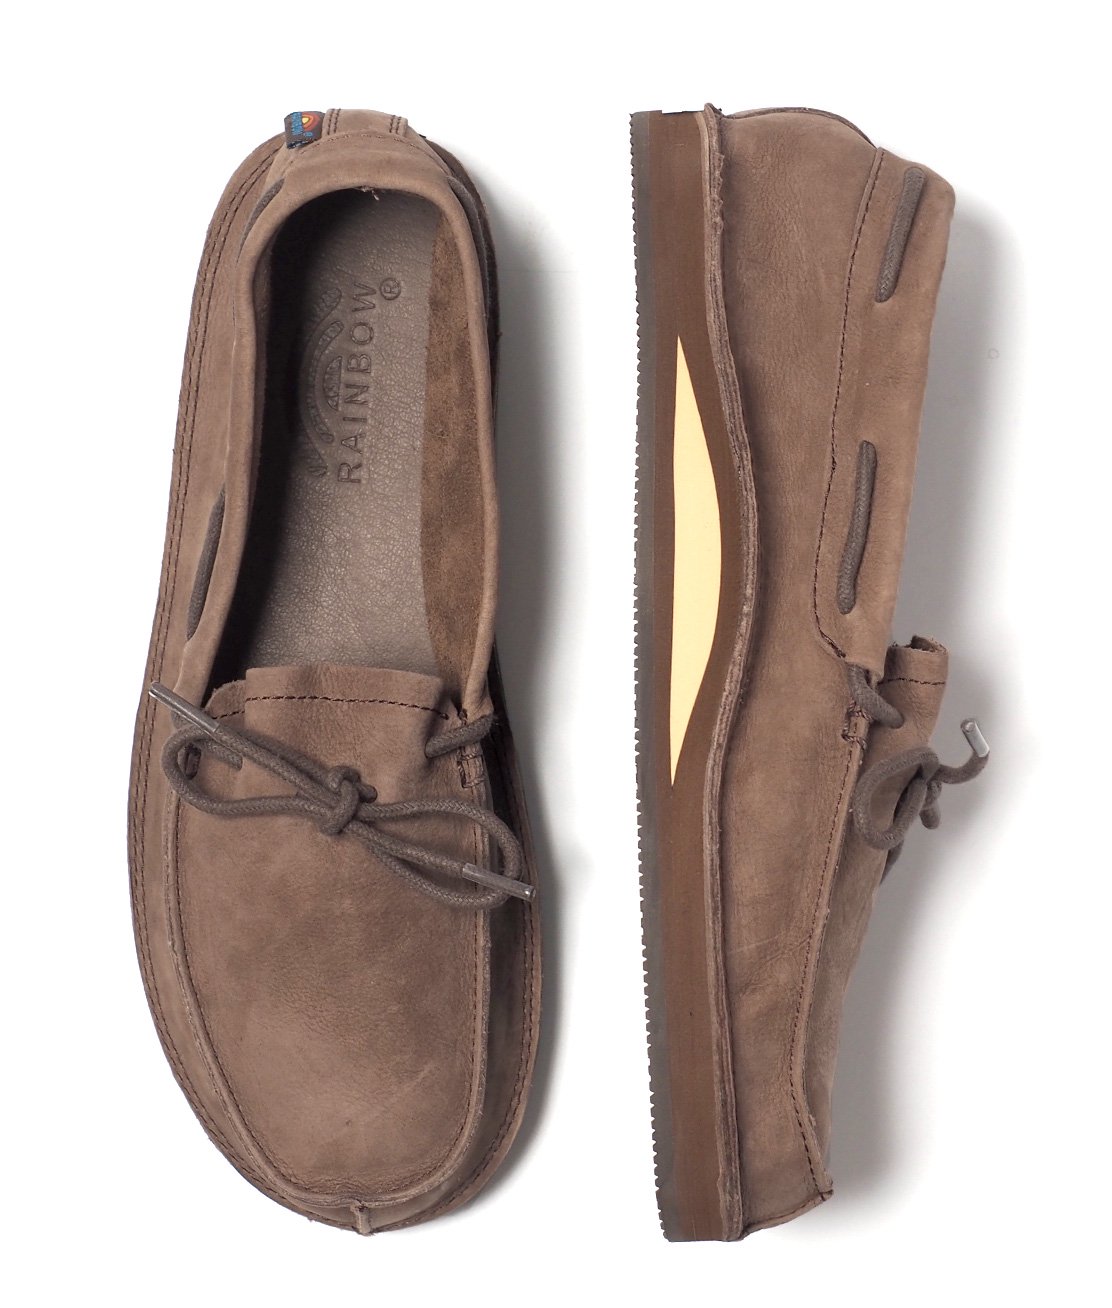 RAINBOW SANDALS】MOCCA LOAFER - EXPRESSO モカローファー シューズ 